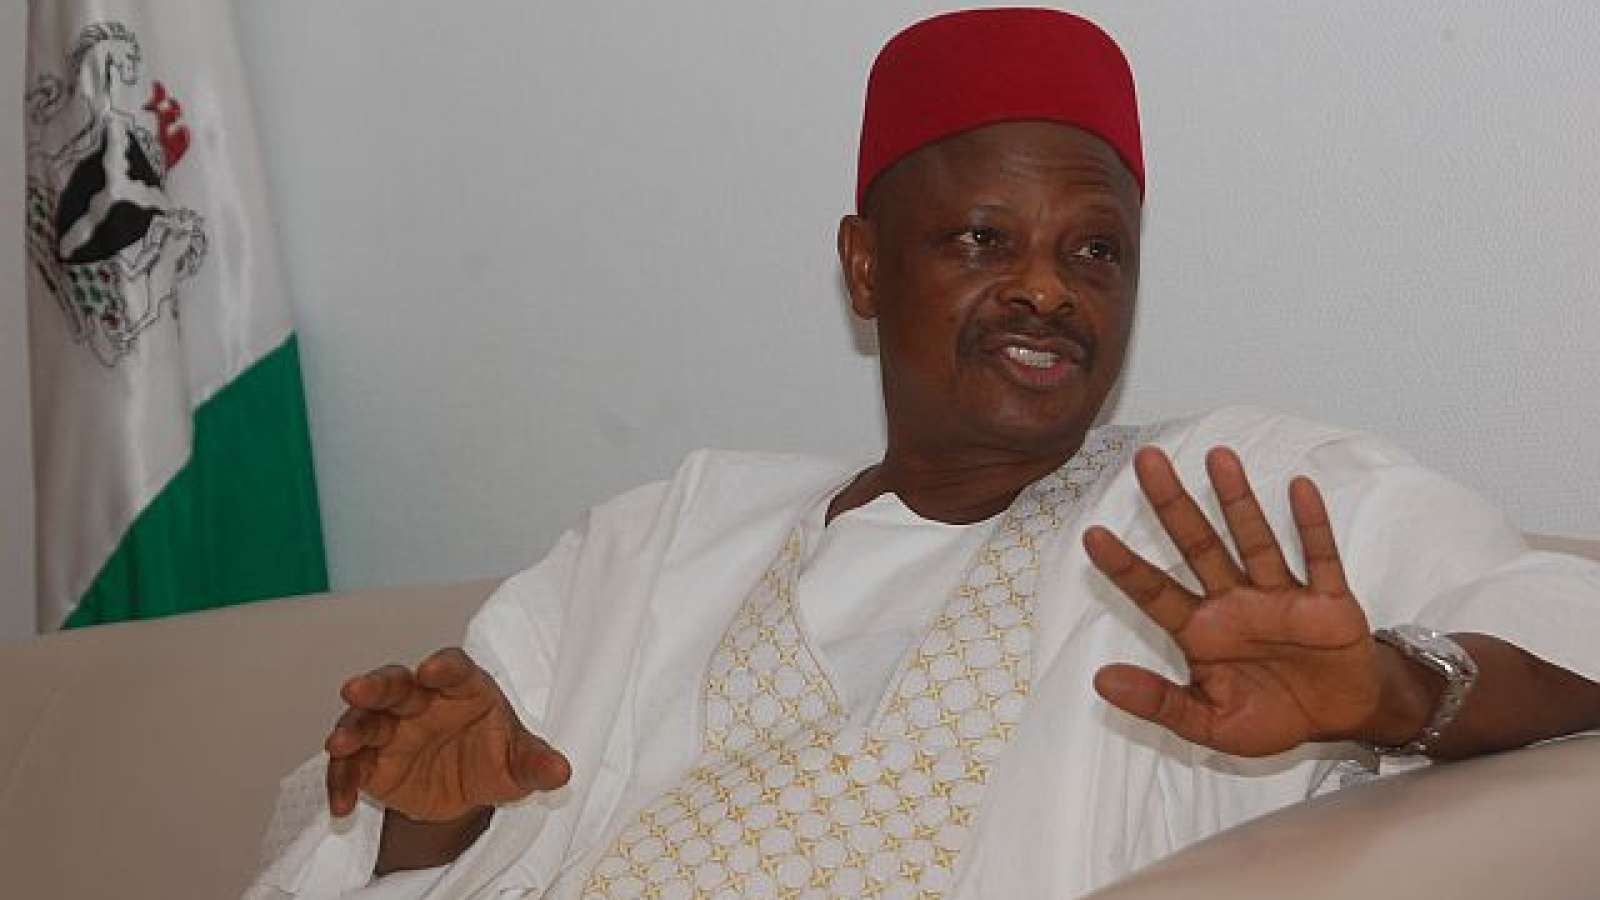 Kwankwaso Suspends Visit To Kano After Meeting With Buhari